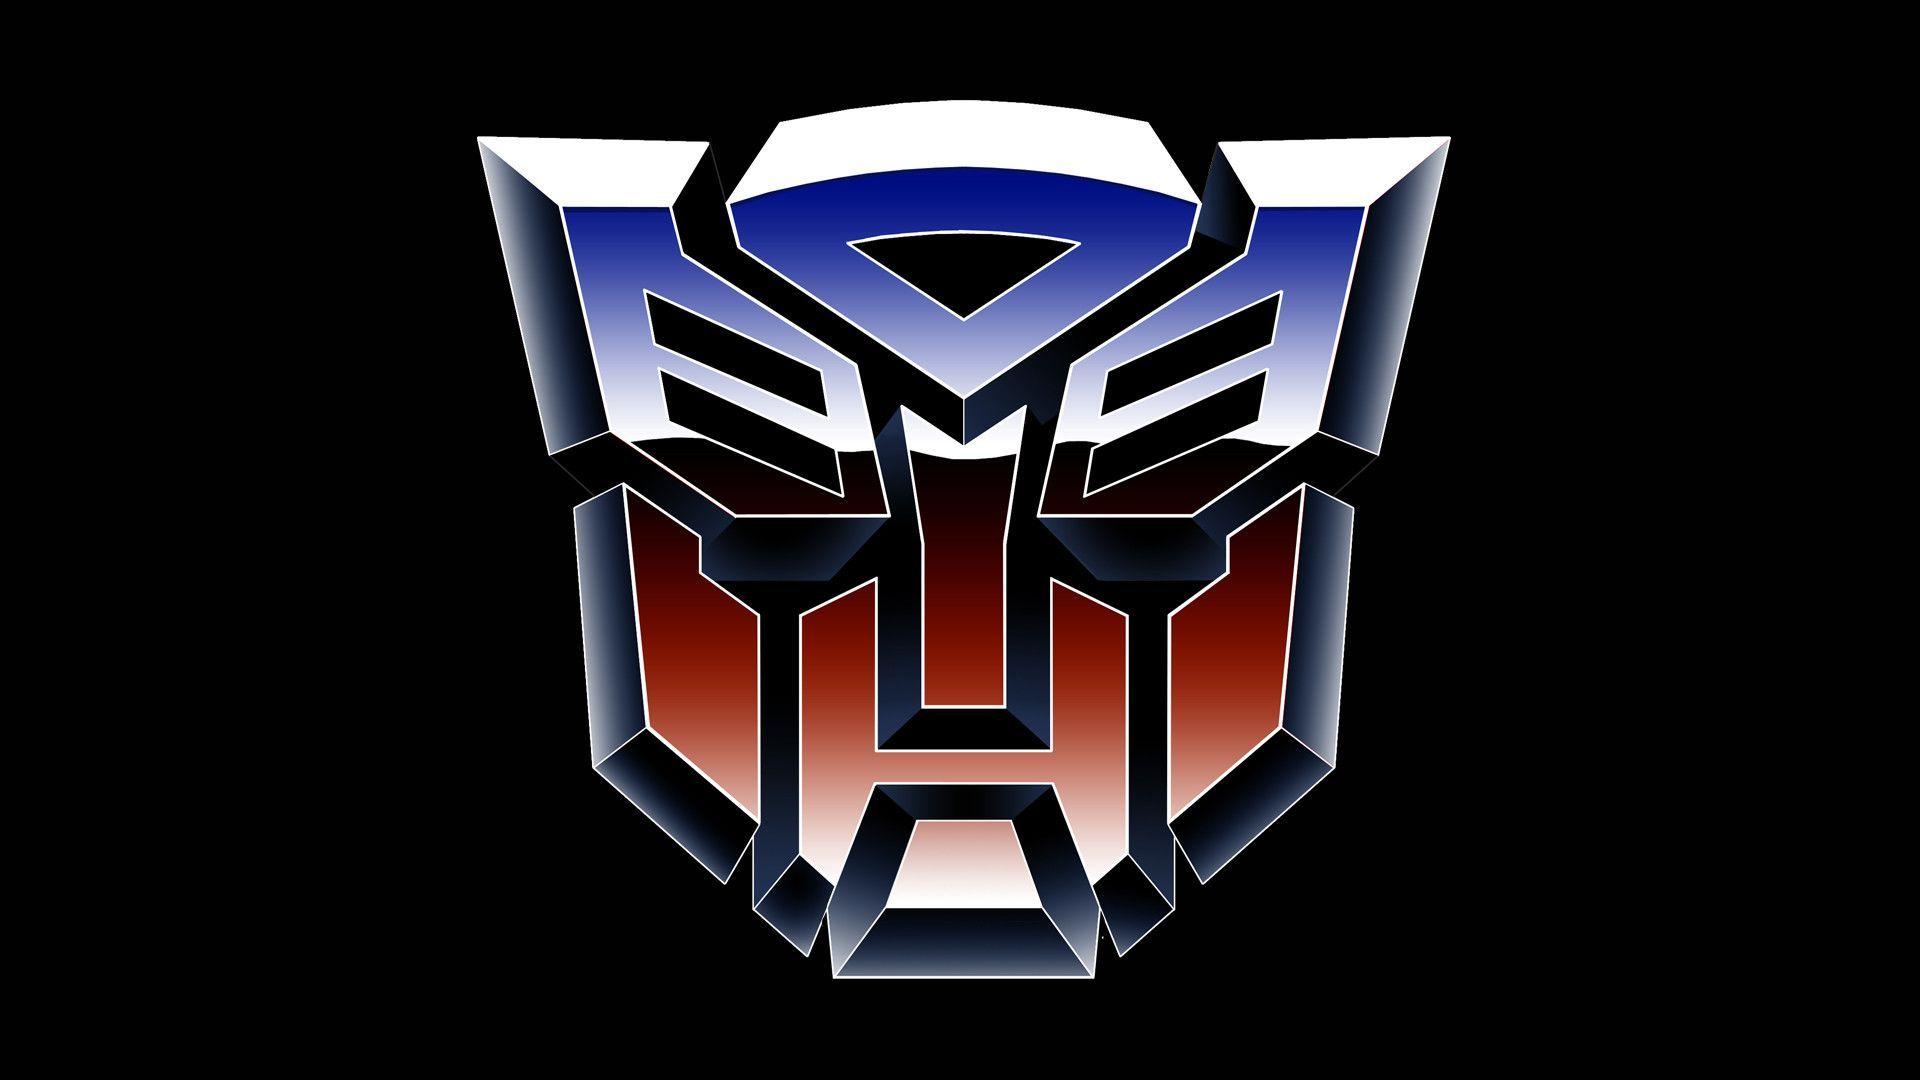 Transformers Autobot Logo Wallpapers 1280x1024 px Free Download